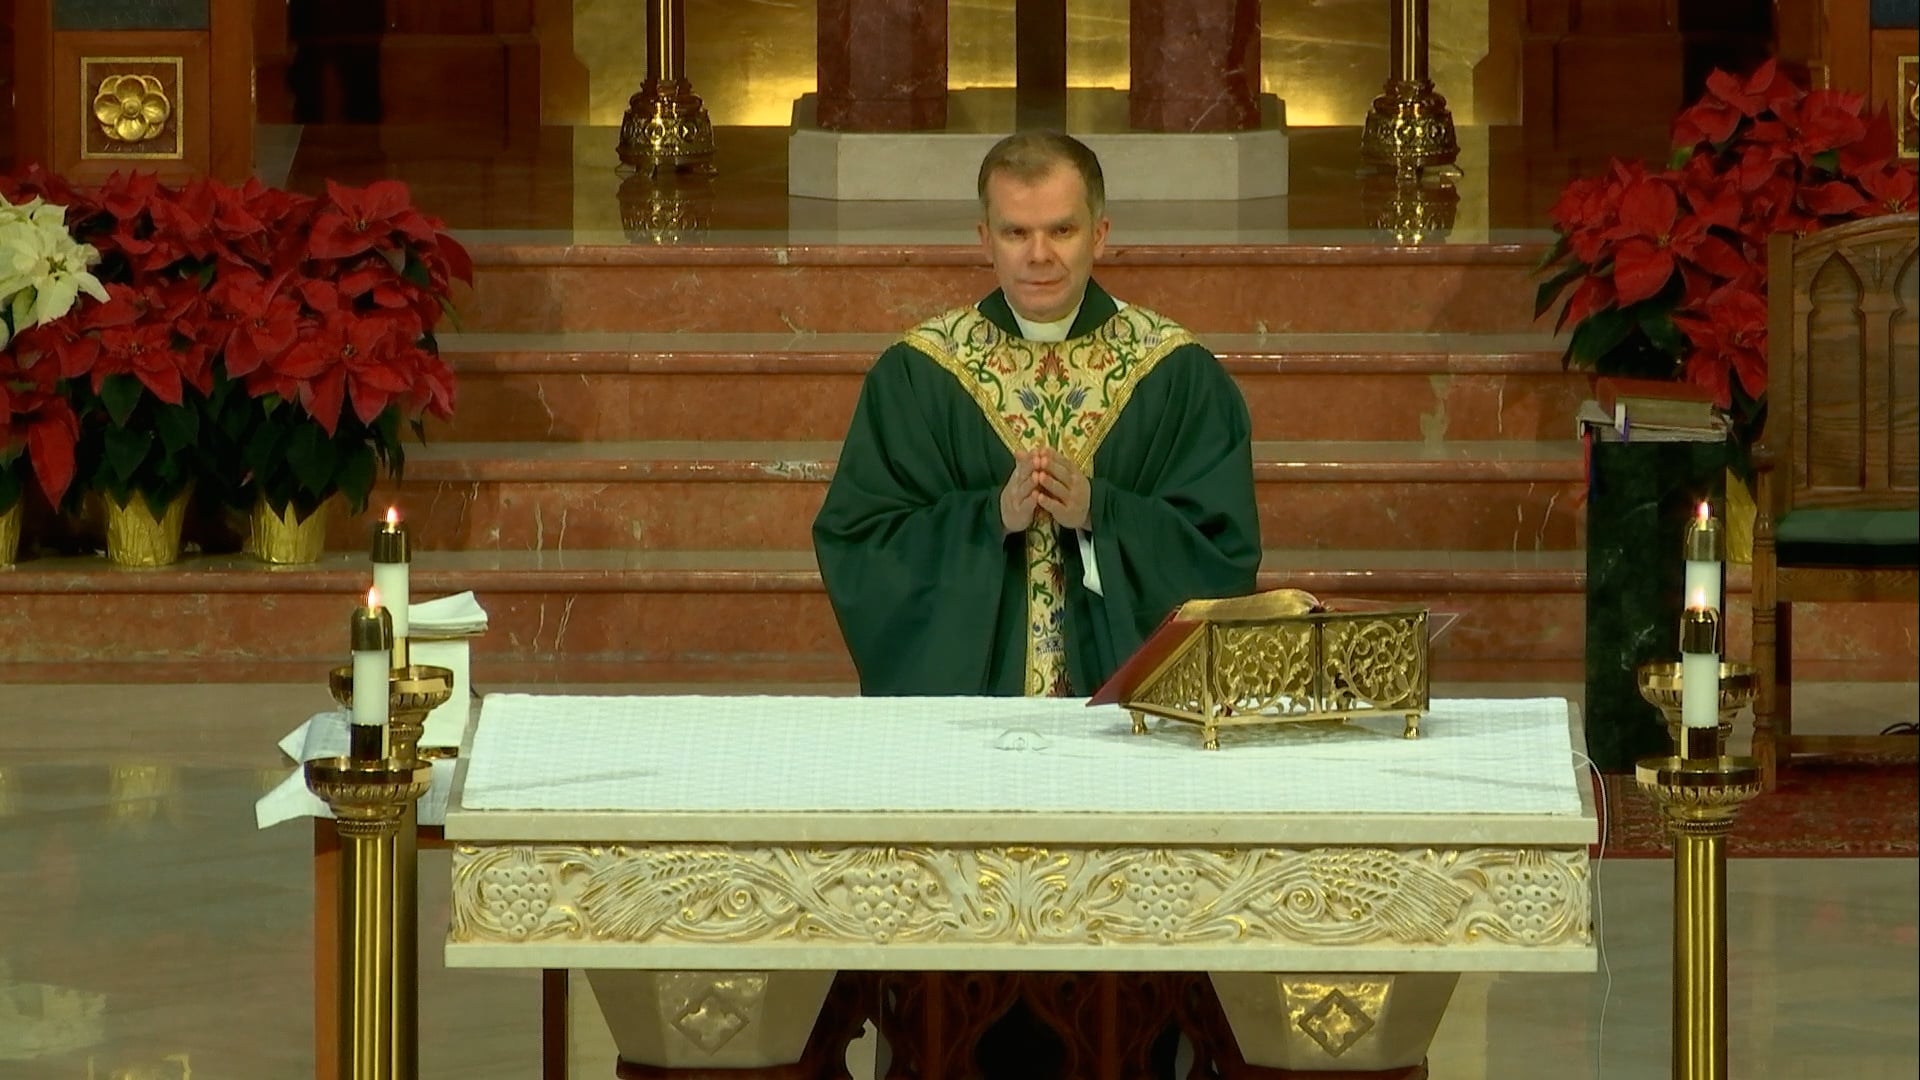 Mass from St. Agnes Cathedral - January 19, 2022